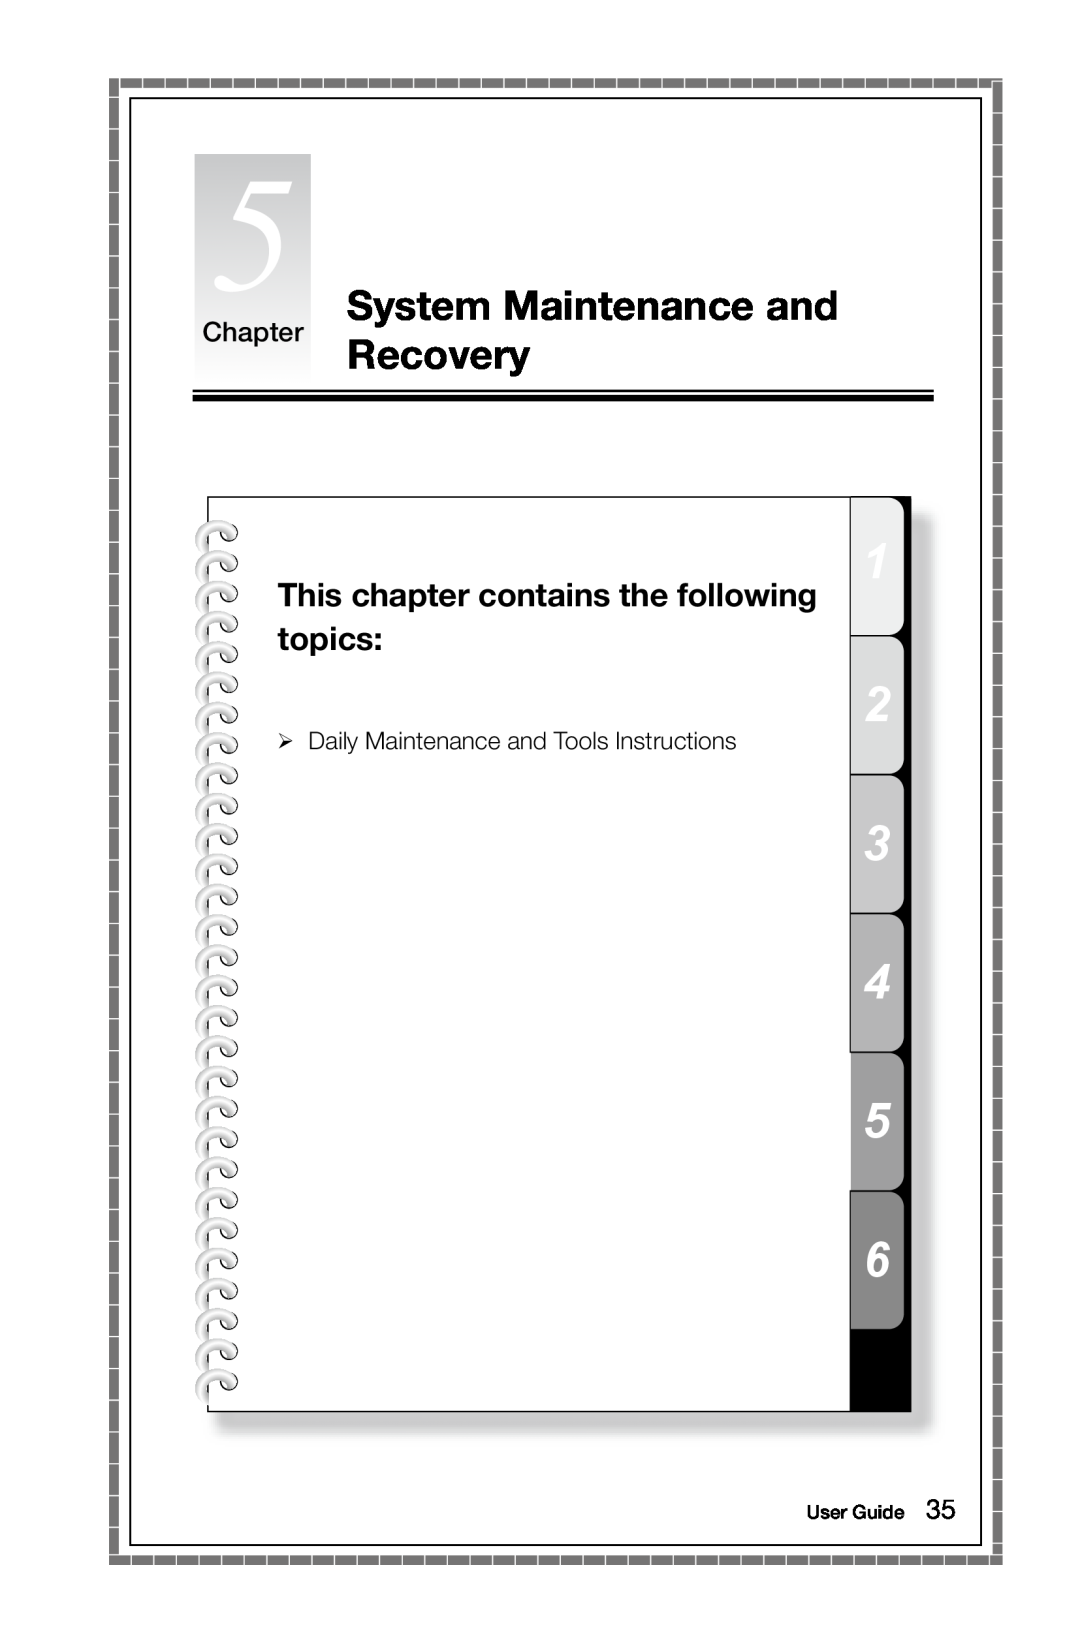 Lenovo 10051, B3, 10052 System Maintenance and Chapter Recovery, This chapter contains the following topics, User Guide 